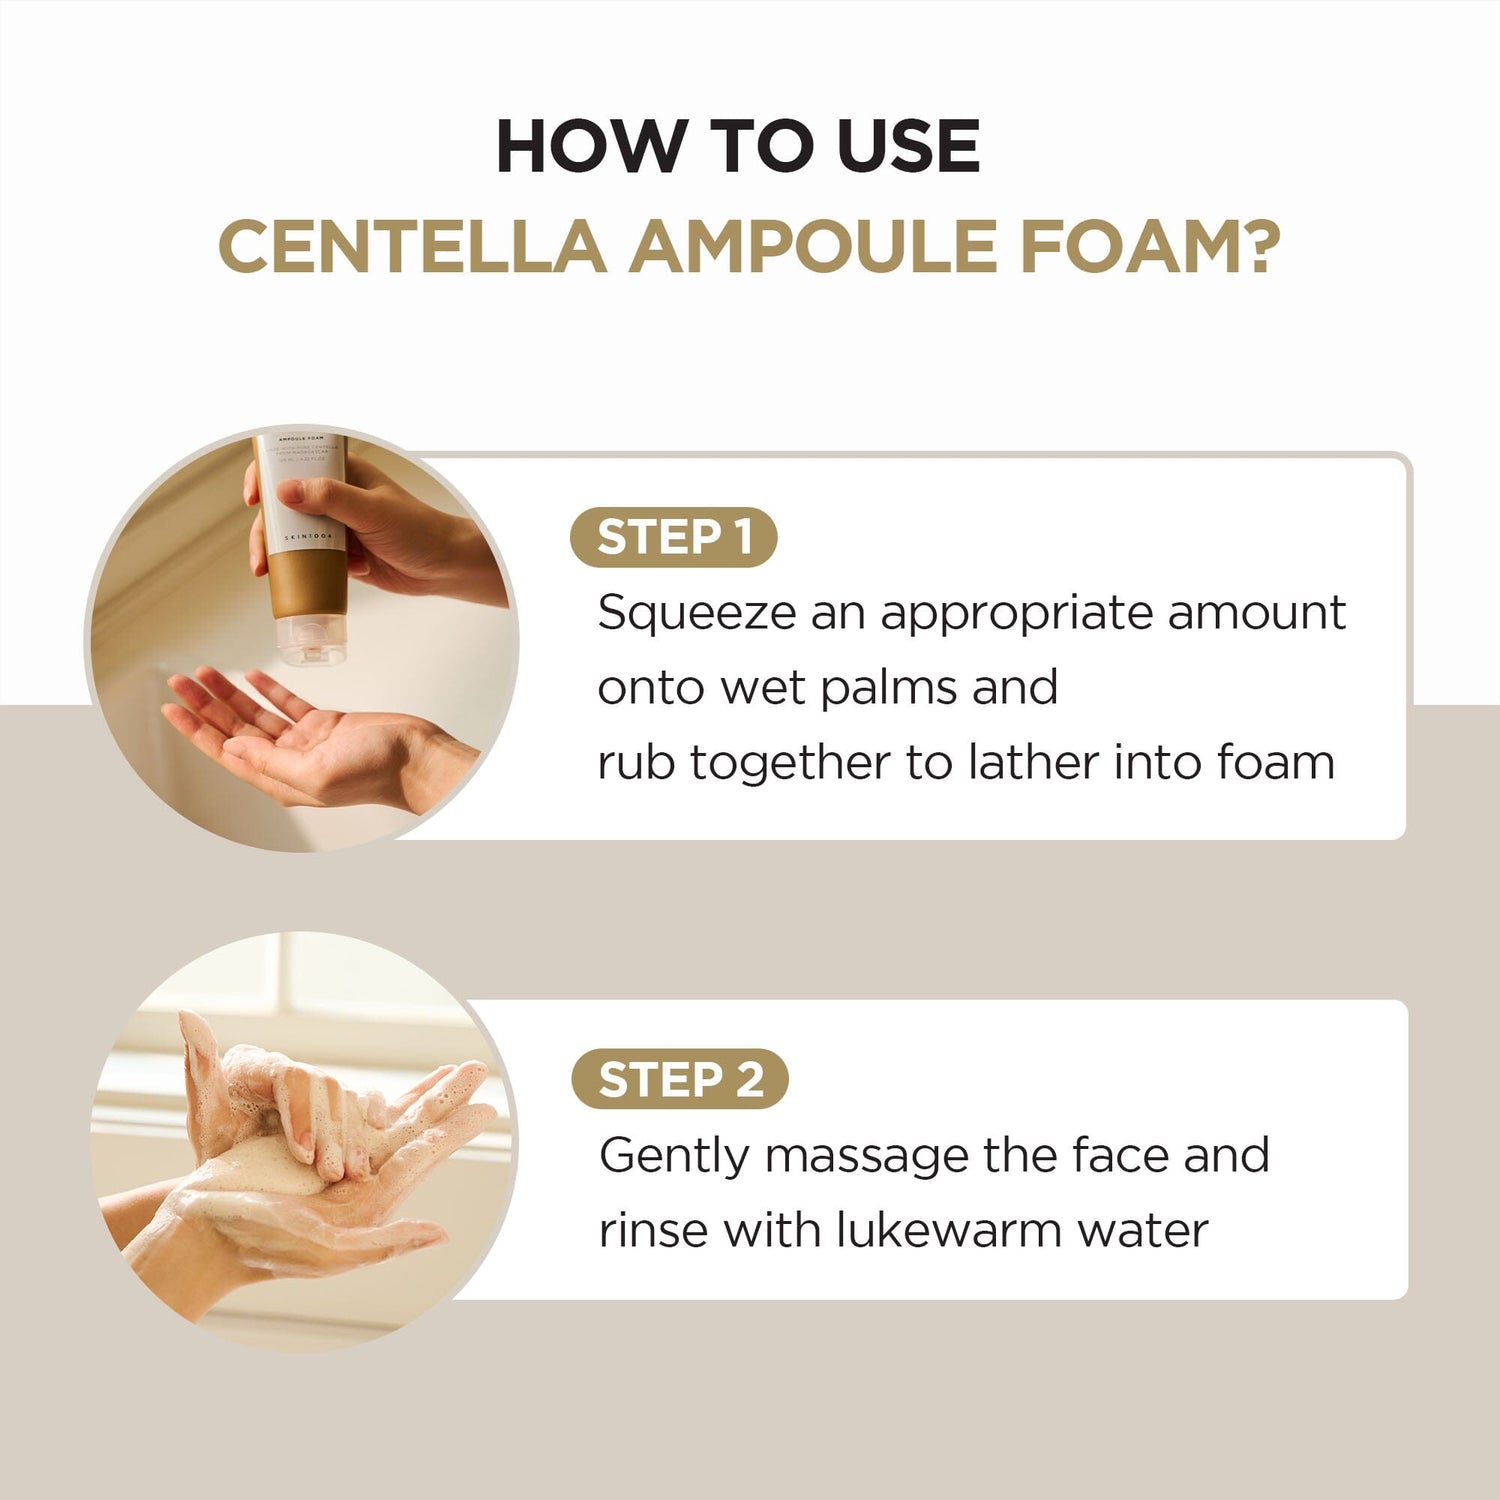 SKIN1004 Madagascar Centella Ampoule Foam 125ml, at Orion Beauty. SKIN1004 Official Sole Authorized Retailer in Sri Lanka!